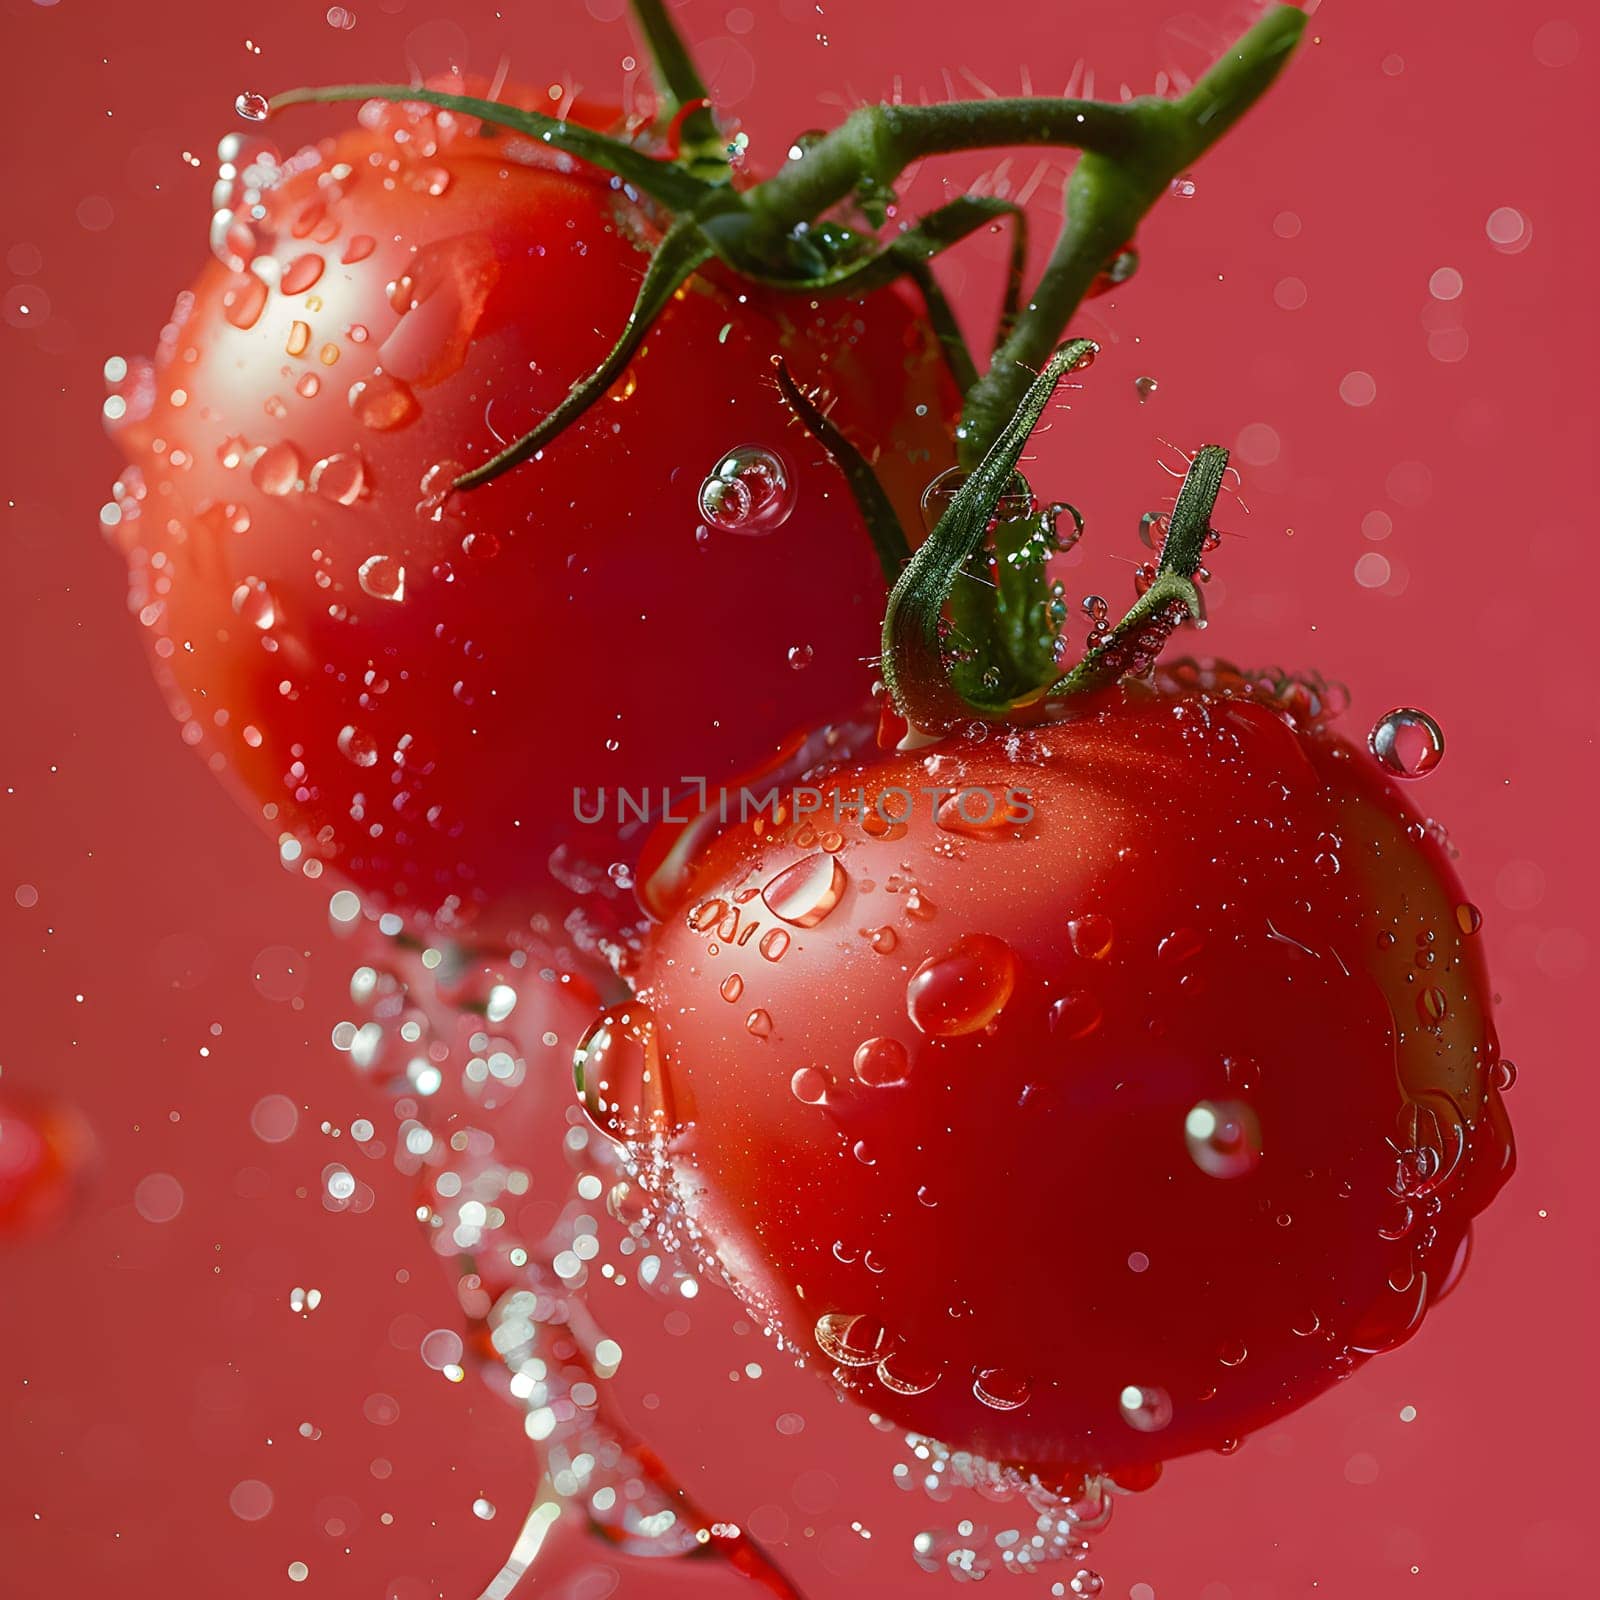 Two tomatoes, a staple food and superfood, are immersed in liquid on a red background, highlighting their natural, plantbased essence as fruits